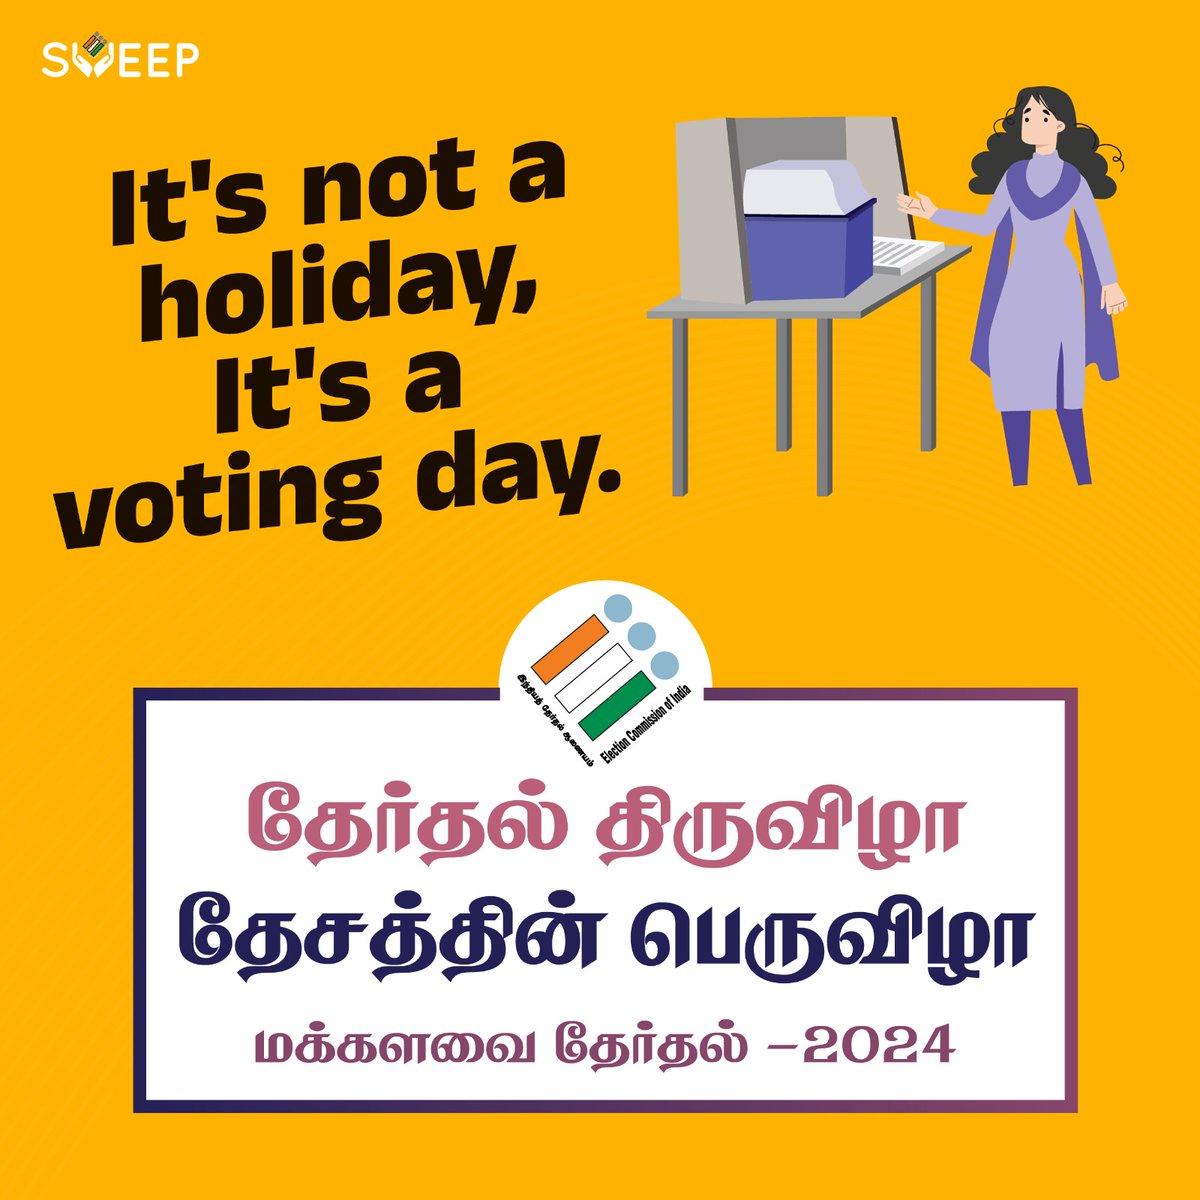 Gear up! It's democracy's call, time to vote! Be sure to cast your ballots by 6pm today. #LokSabha2024 #ChunavKaParv #DeshKaGarv #ECI #GeneralElections2024 #Elections2024 #LS2024 #AssemblyElections2024 #TamilnaduElections2024 #NoVoterToBeLeftBehind #IVoted4Sure #GoVote